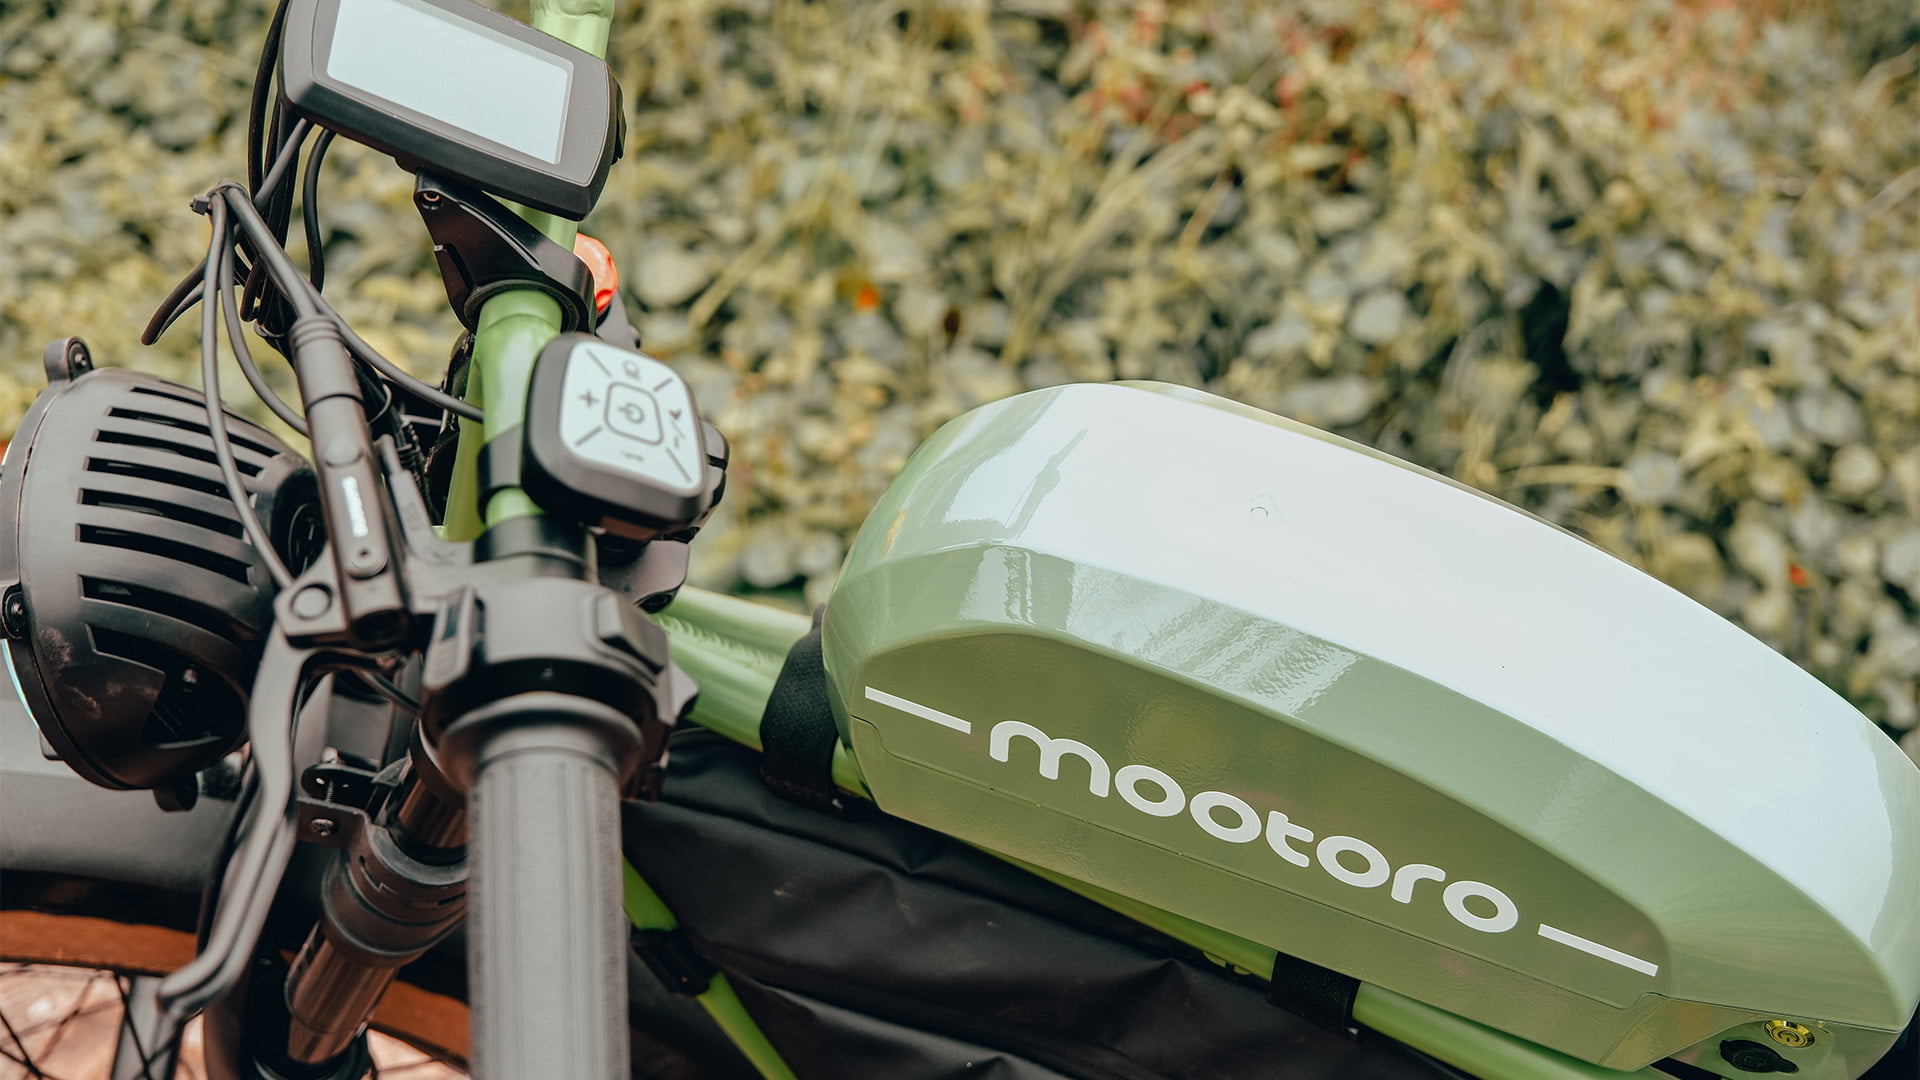 Convenience and extended ride time of the removable battery feature on the R1 Plus electric bike 1000W.